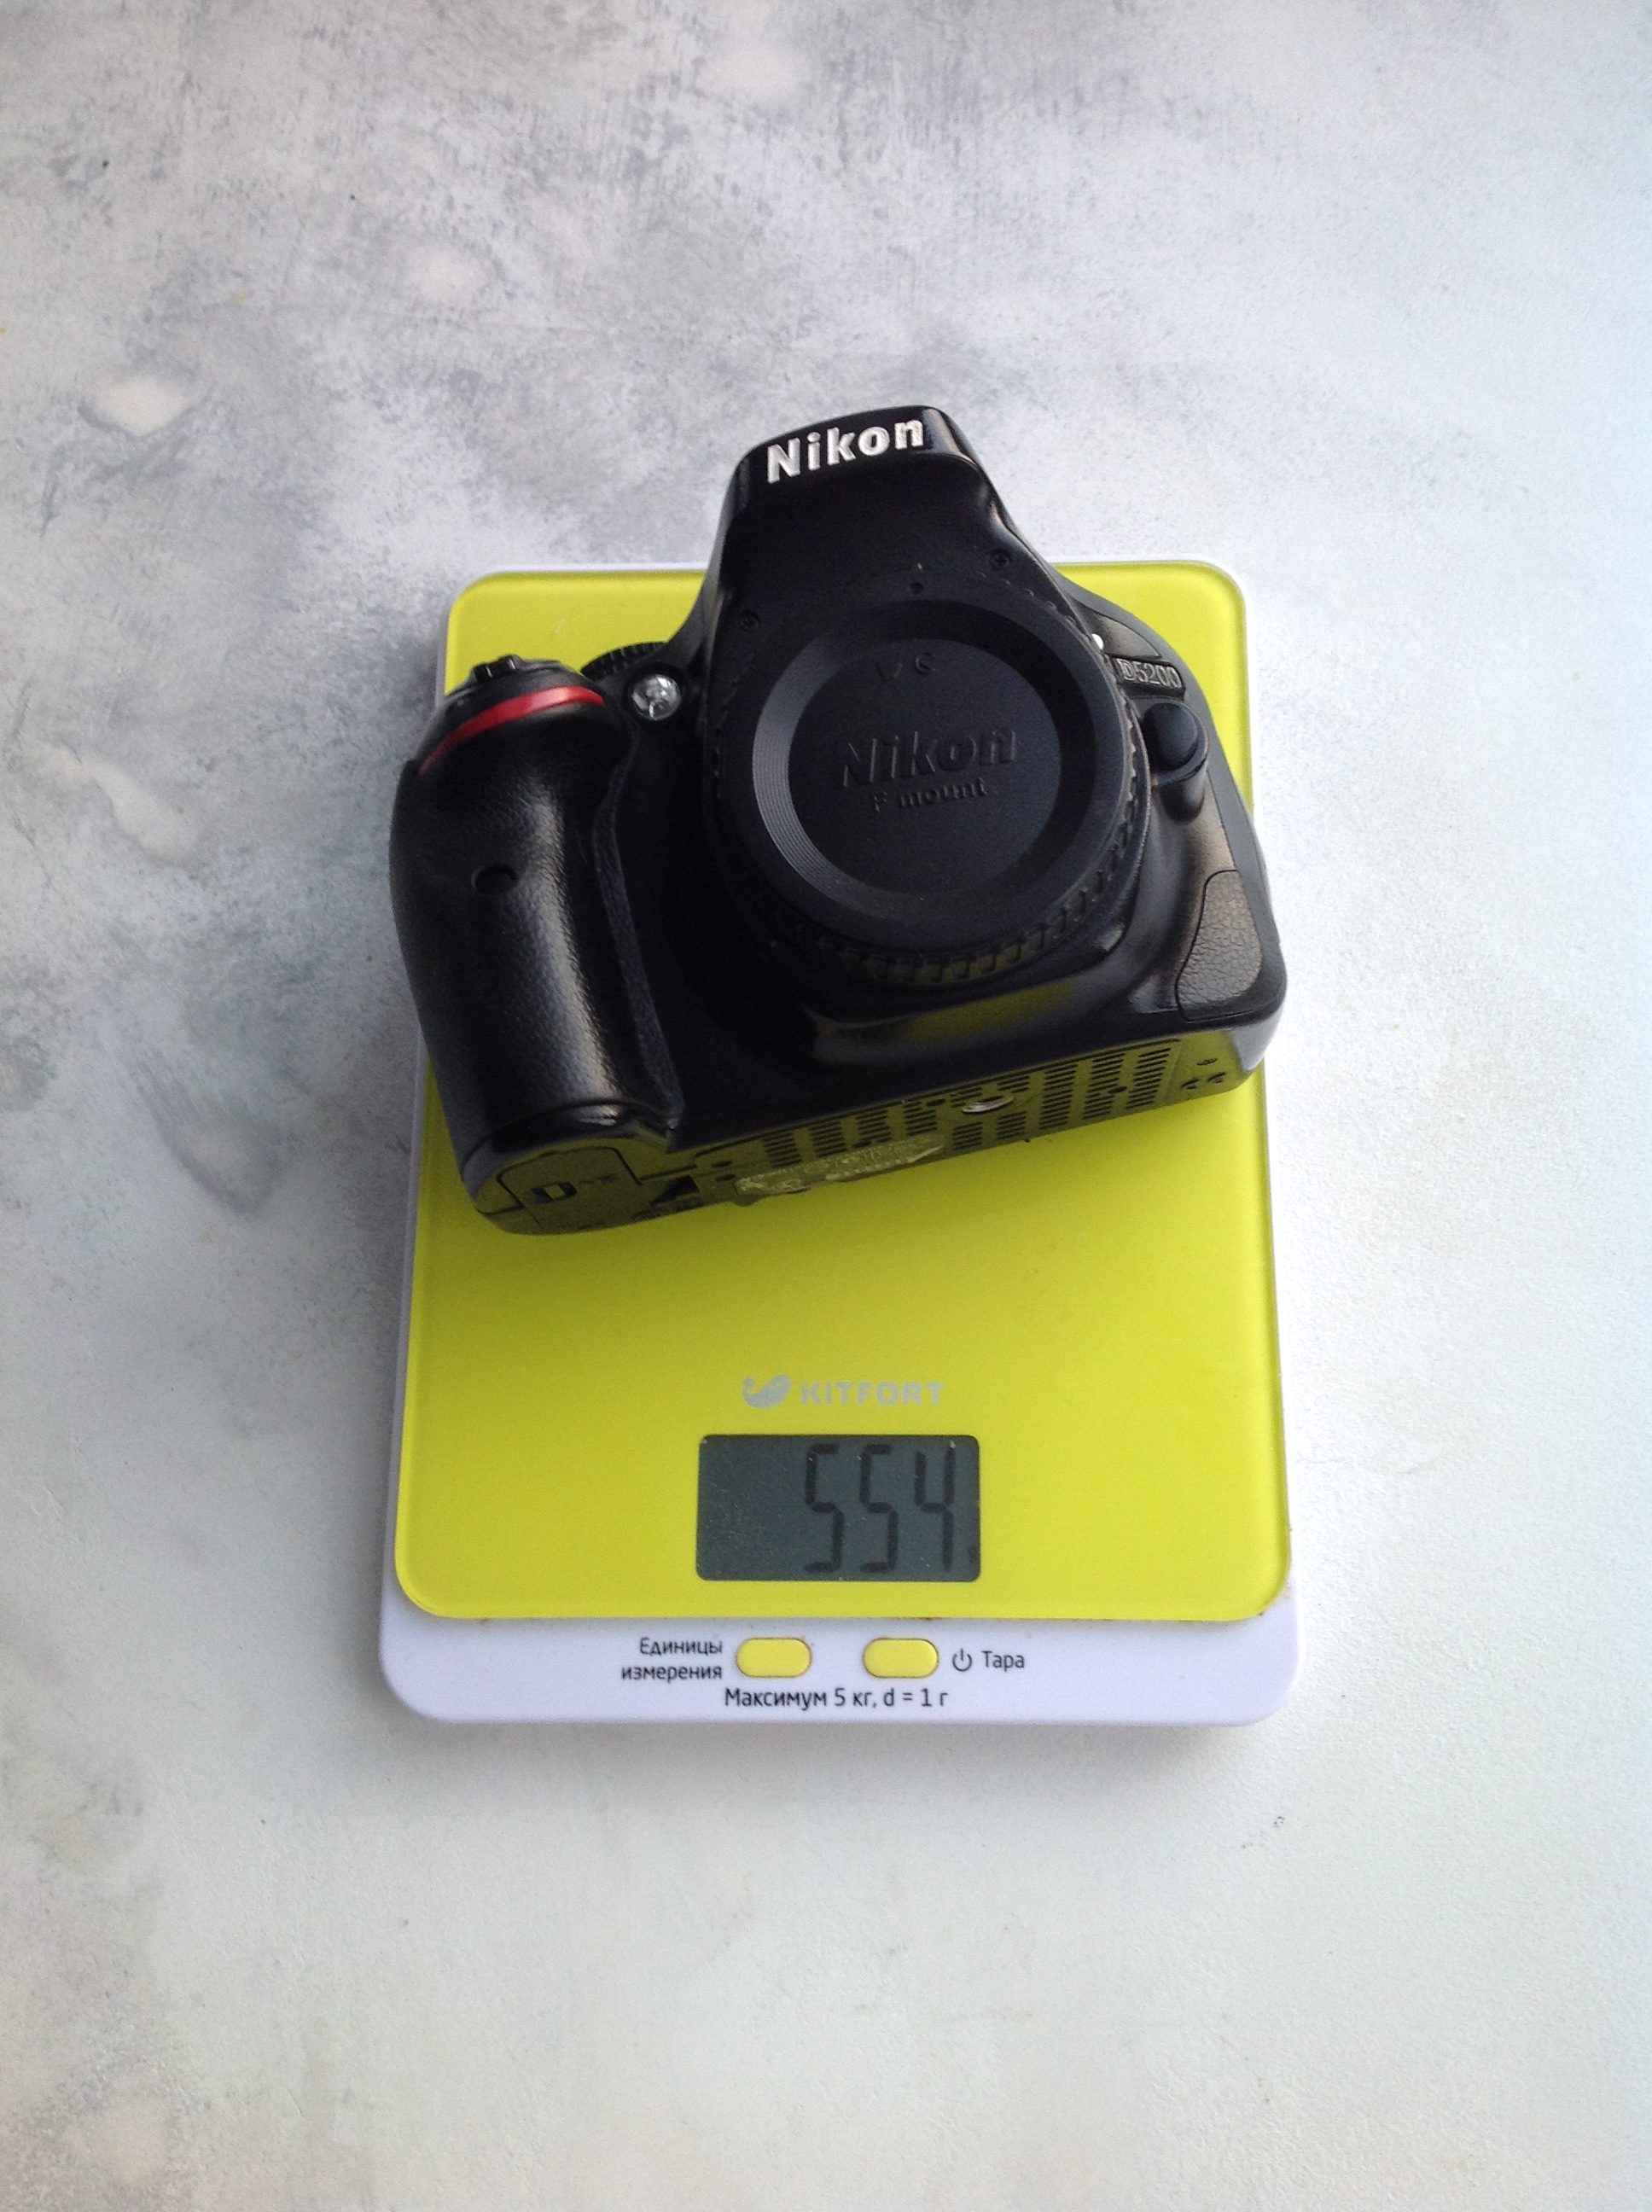 the weight of the nikon d500 body